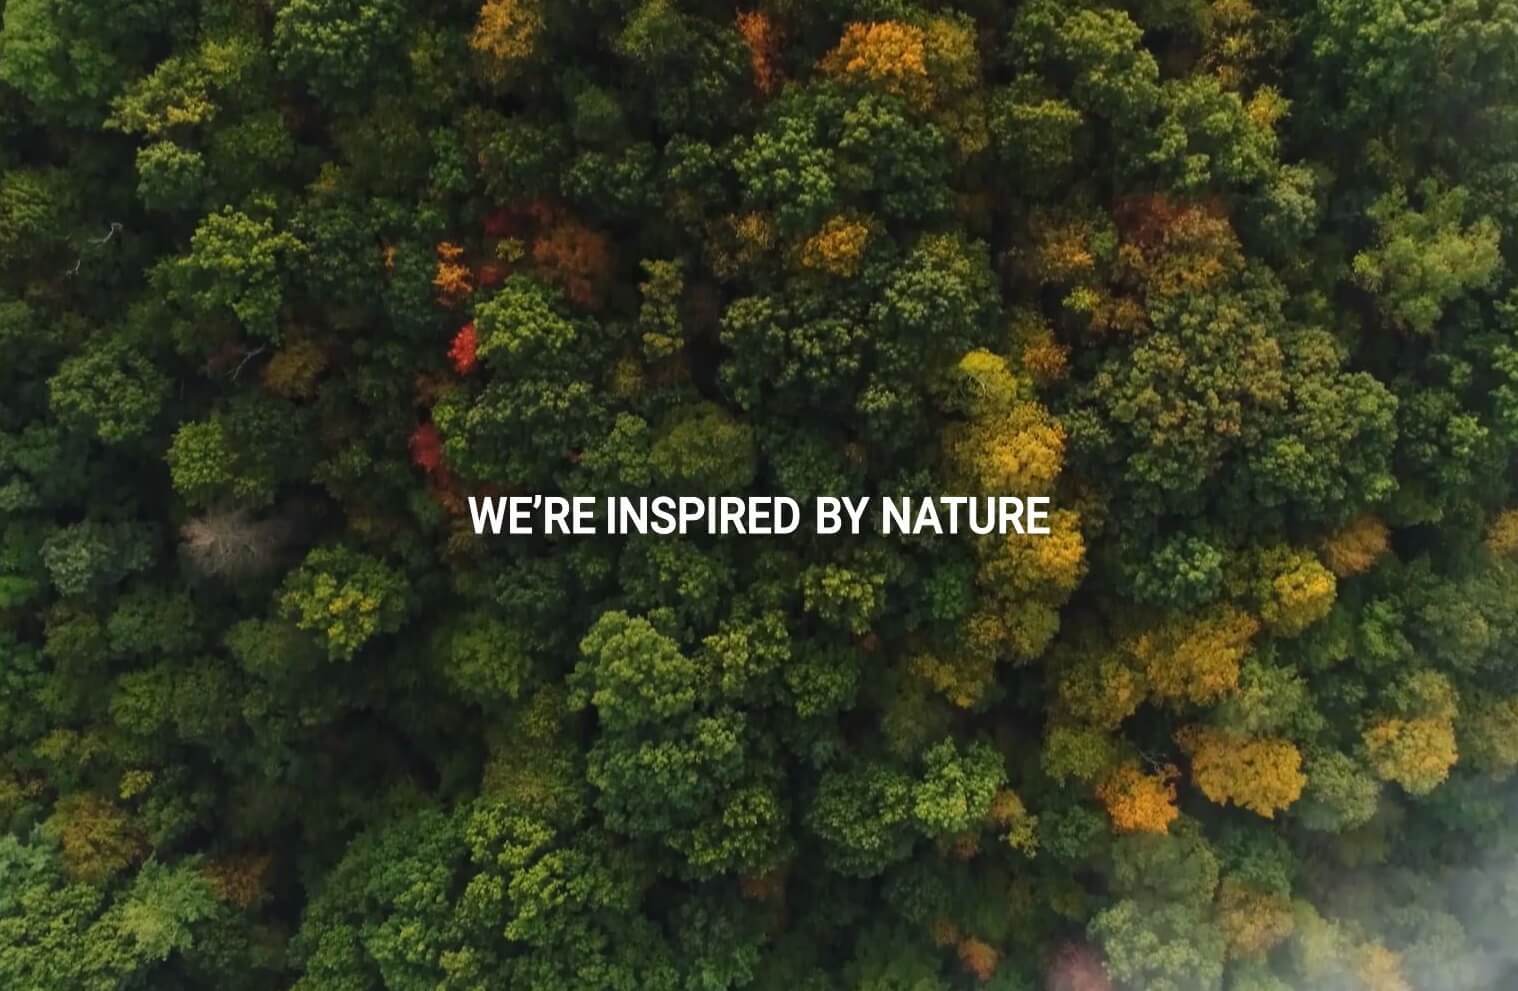 We're inspired by nature